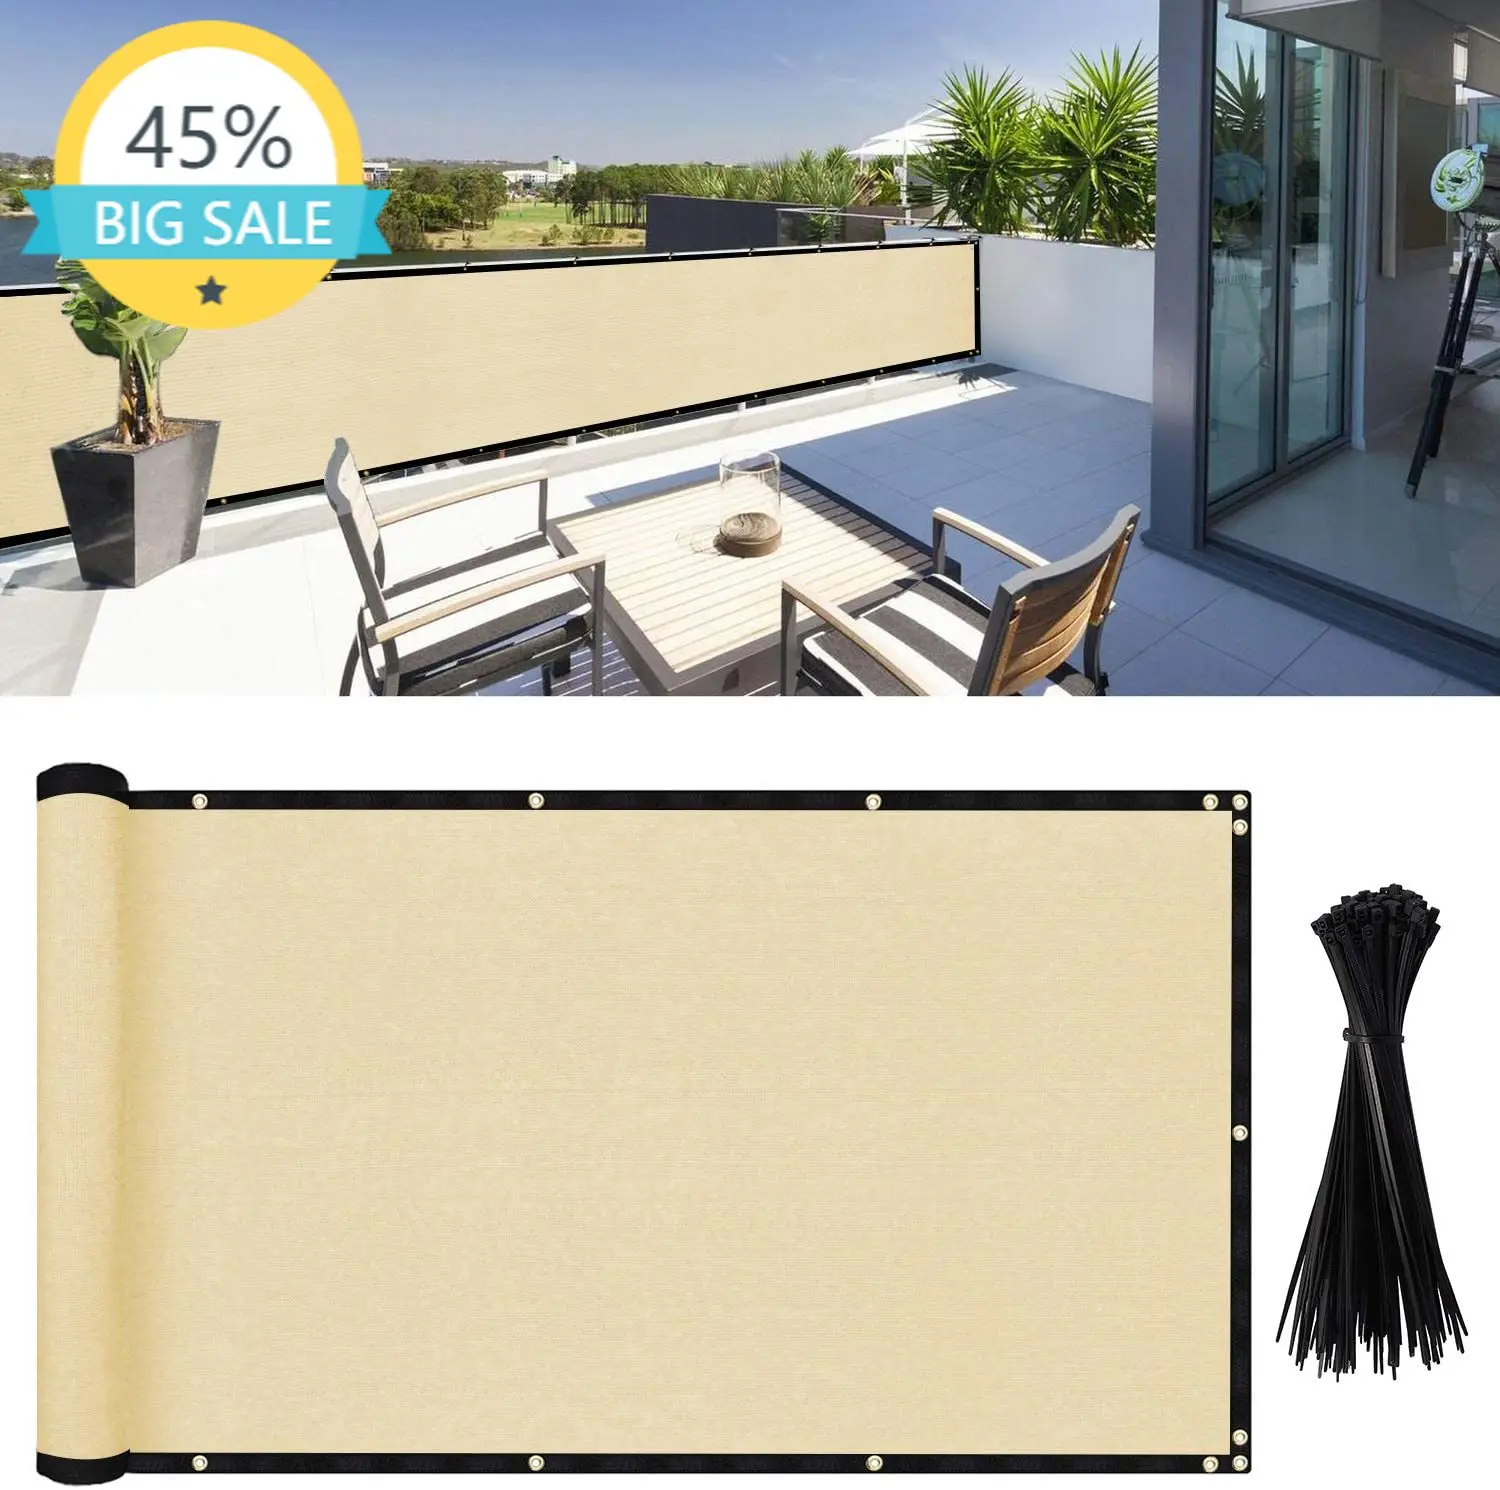 

Balcony Privacy Screen Cover Fence Windscreen for Porch Deck, Outdoor, Balcony to Cover Sun Shade, UV-Proof, Weather-Resistant